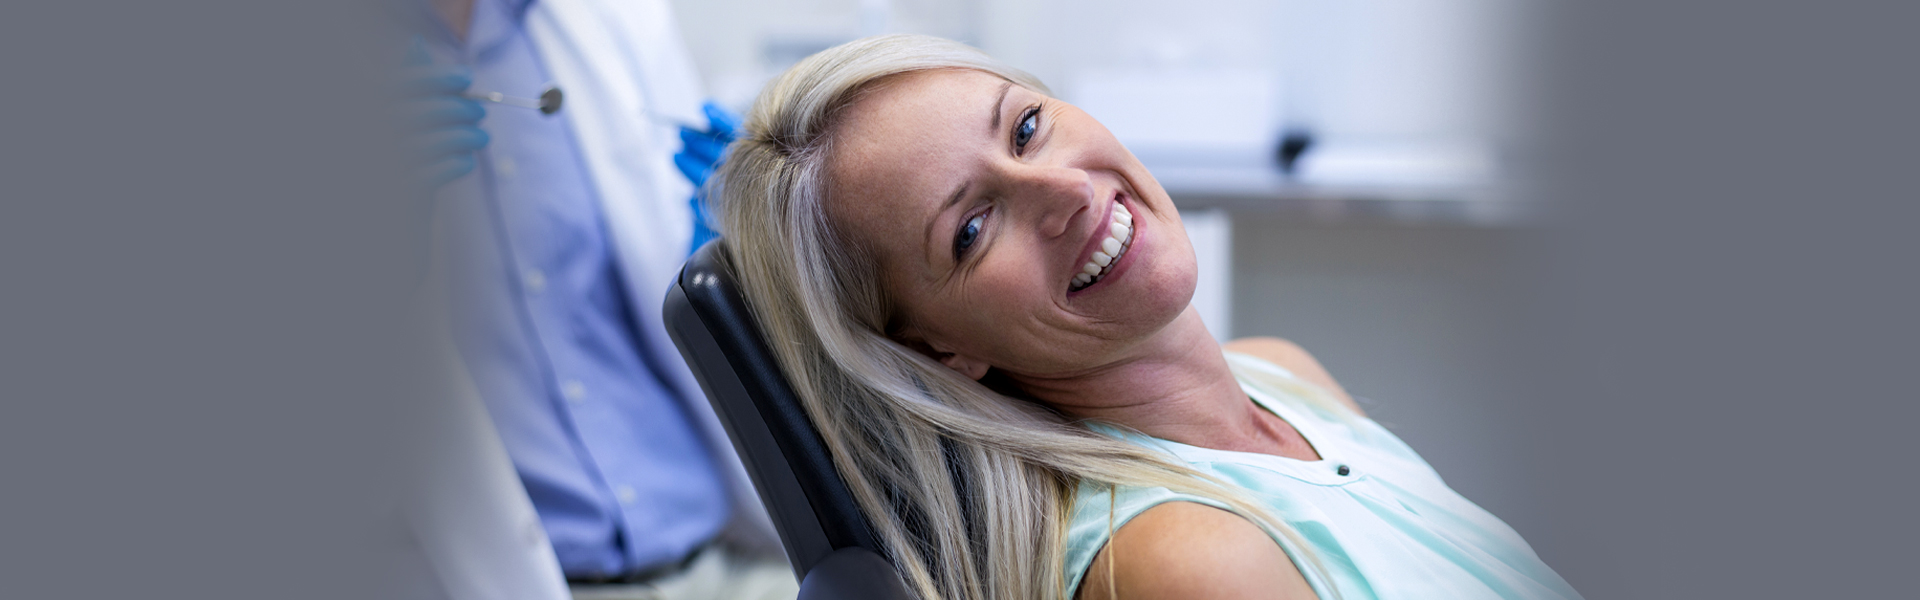 7 Tips for Caring for Your Dental Implant